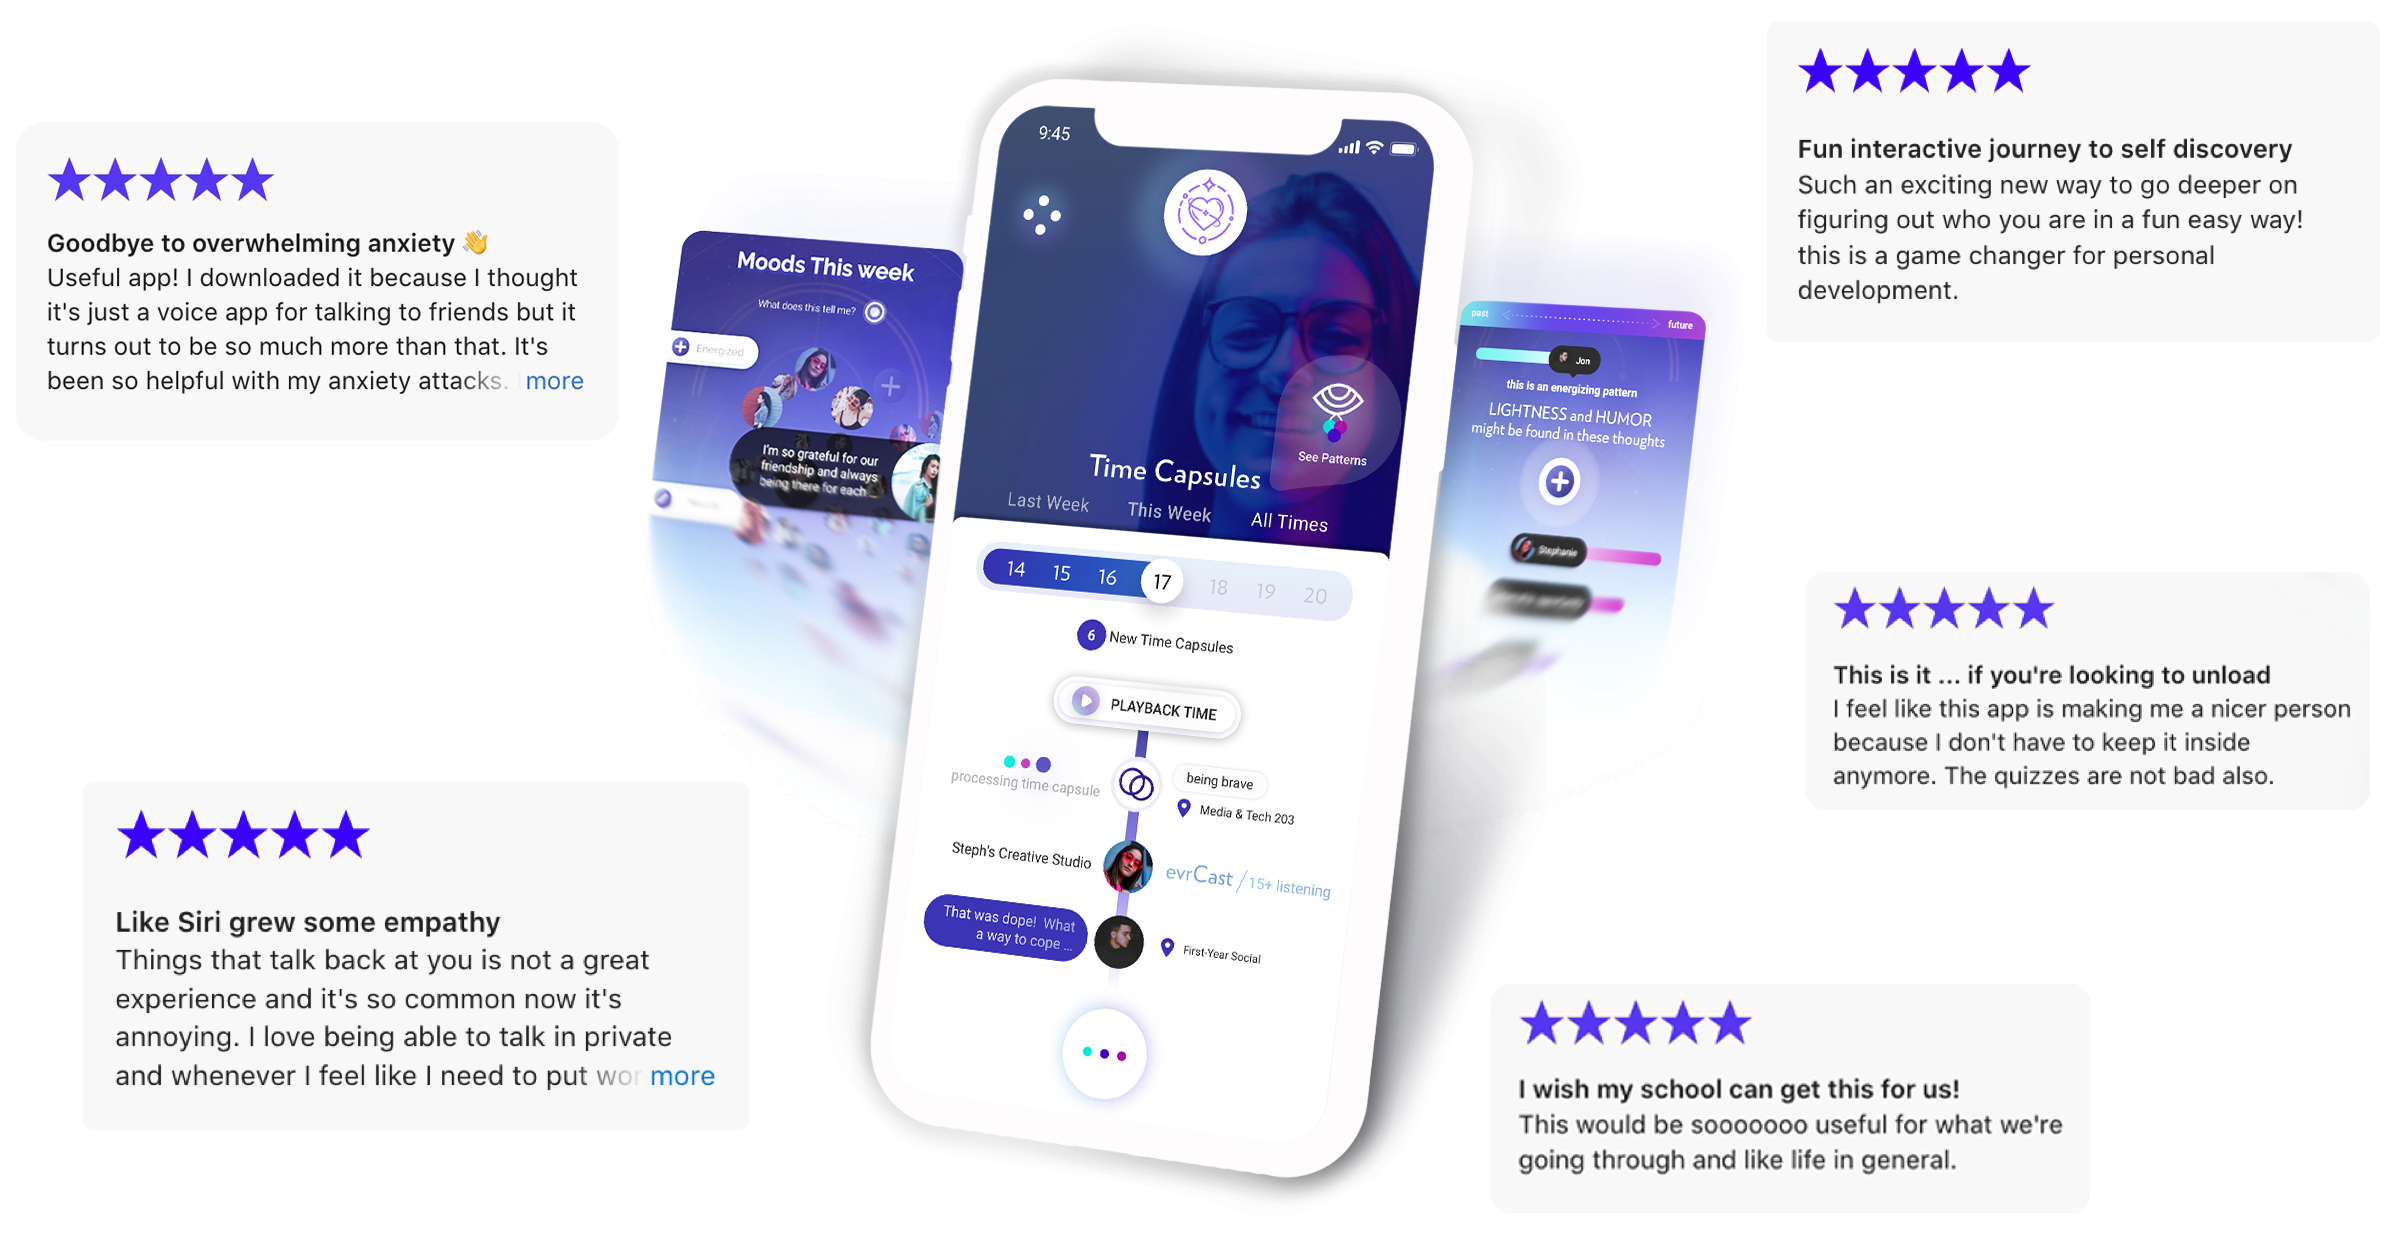 evrmore is the wellness GPS app that helps improve student mental health and engagement. It addresses lackluster engagement and deteriorating mental health based on today's behaviors of tech natives